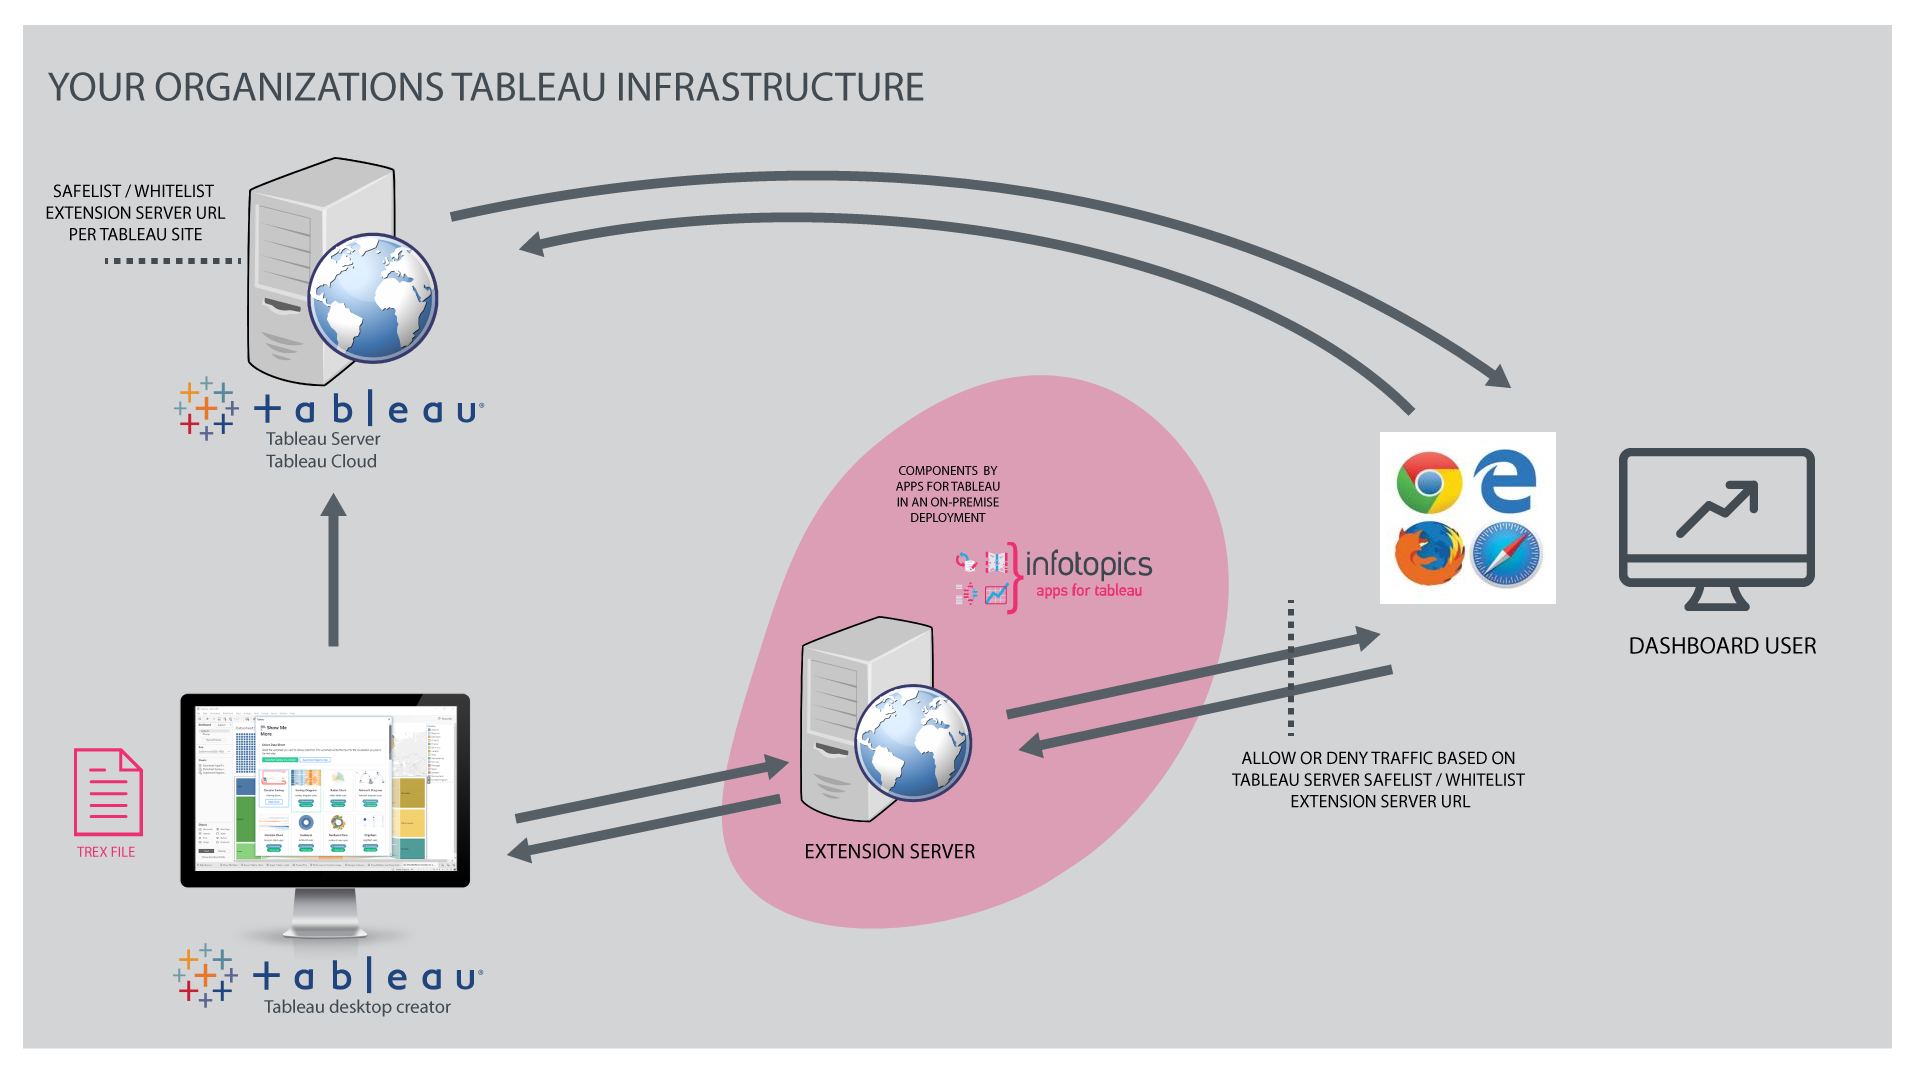 Animation of the architecture for On-Premise or Private Cloud deployments of our Premium Tableau Dashboard Extensions (Enterprise Subscriptions)